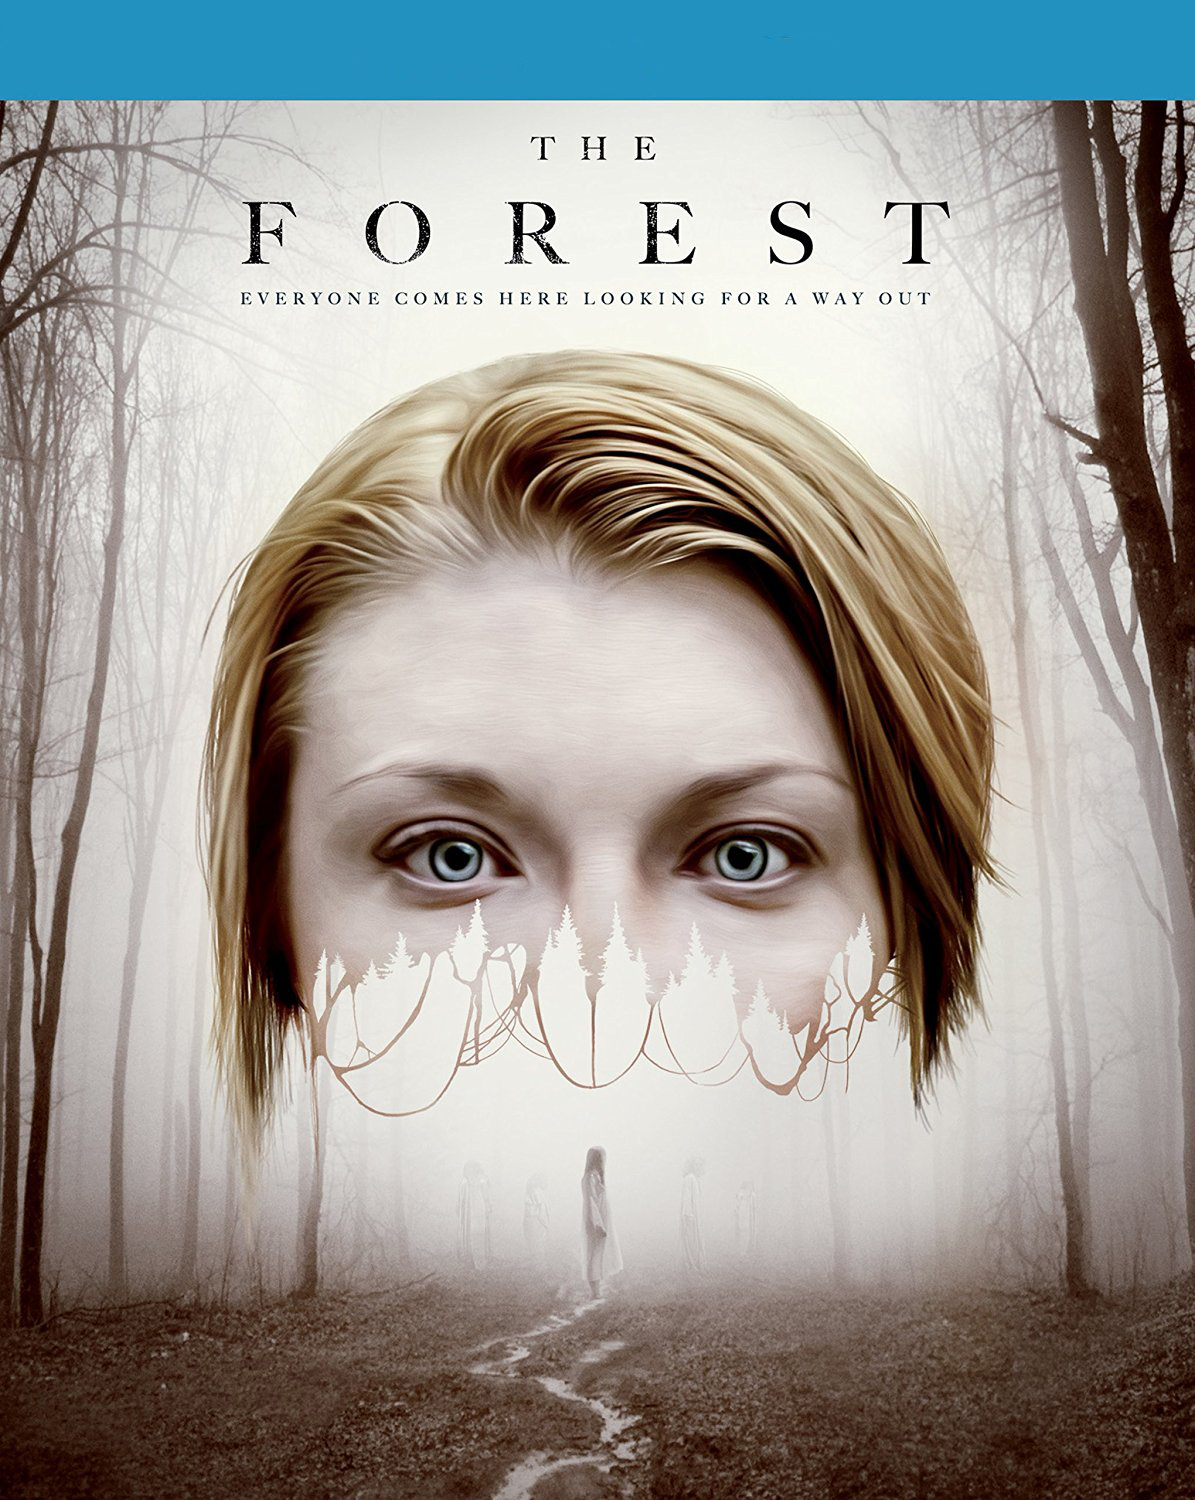 Forest, The